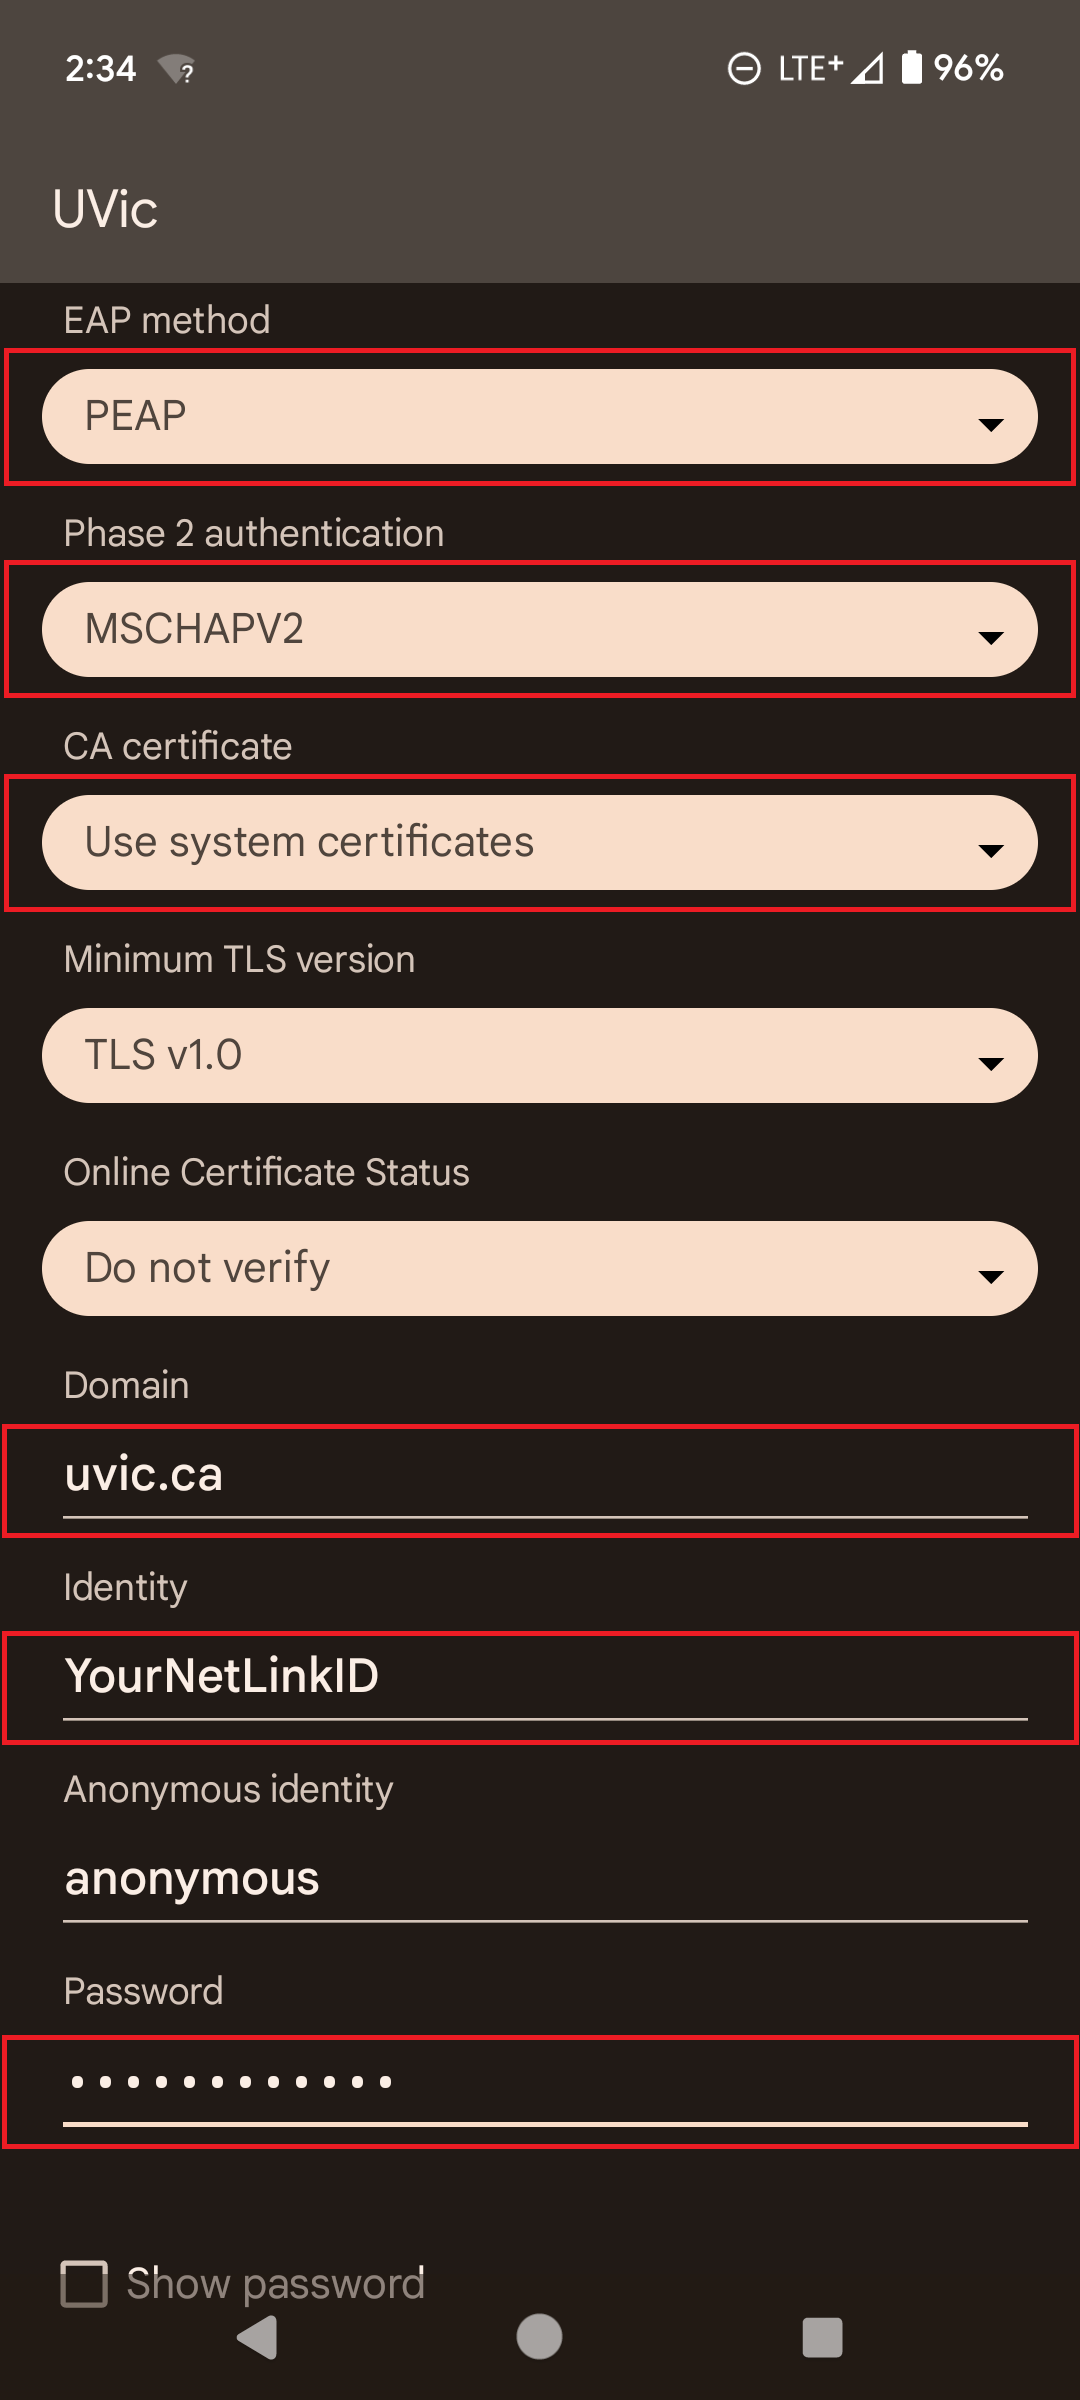 uvic network settings on an android device